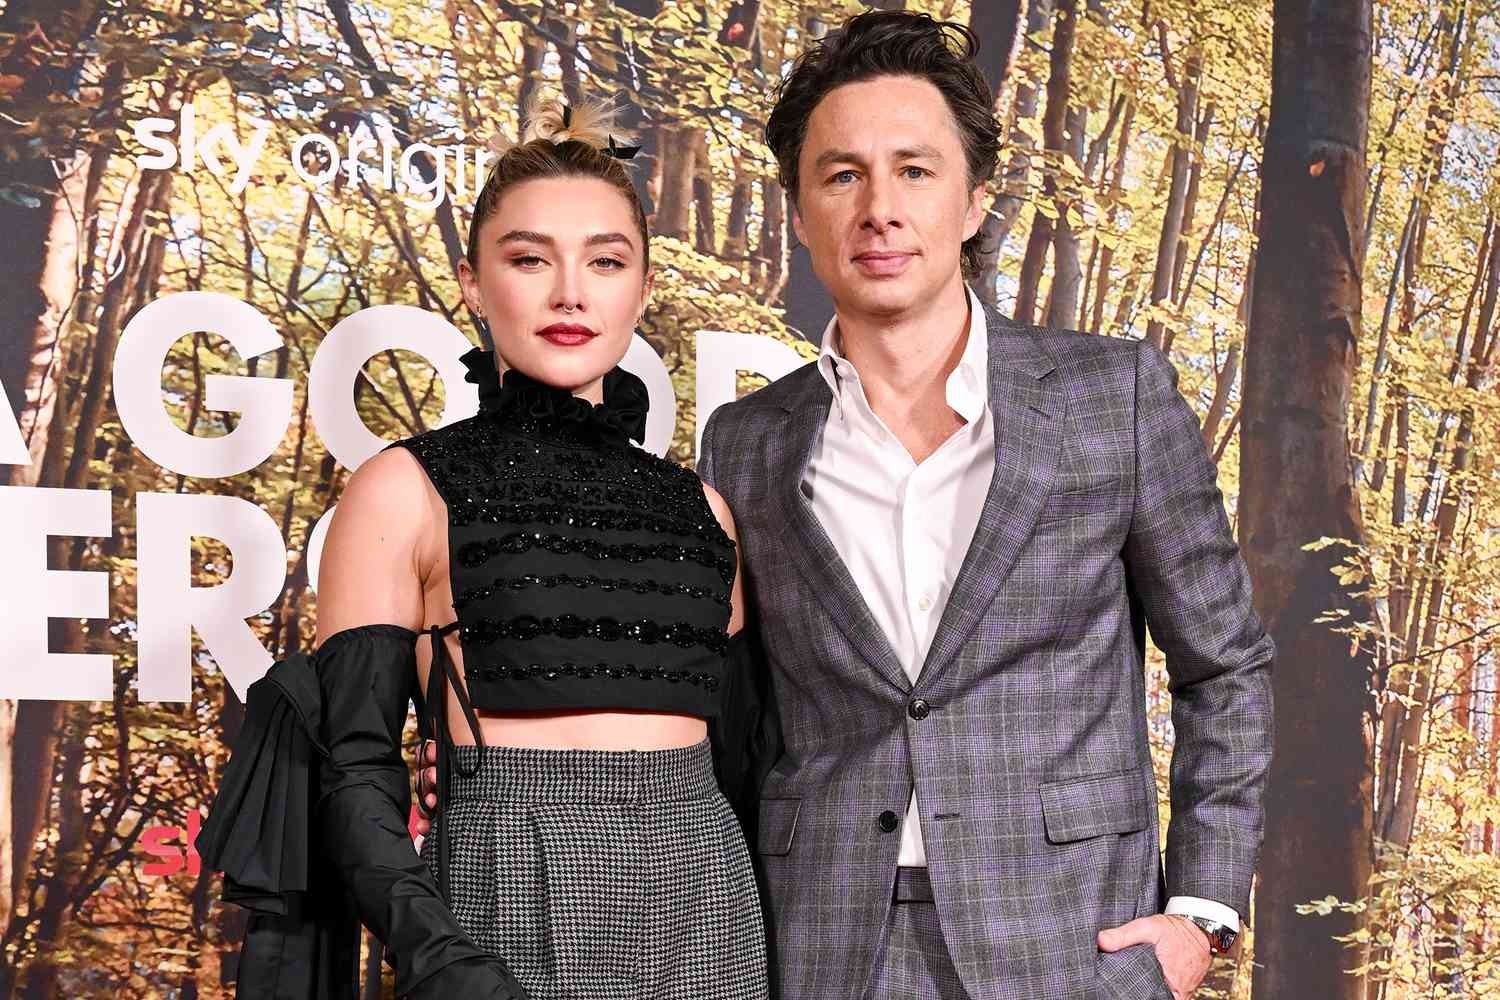 Florence Pugh and Zach Braff on the red carpet